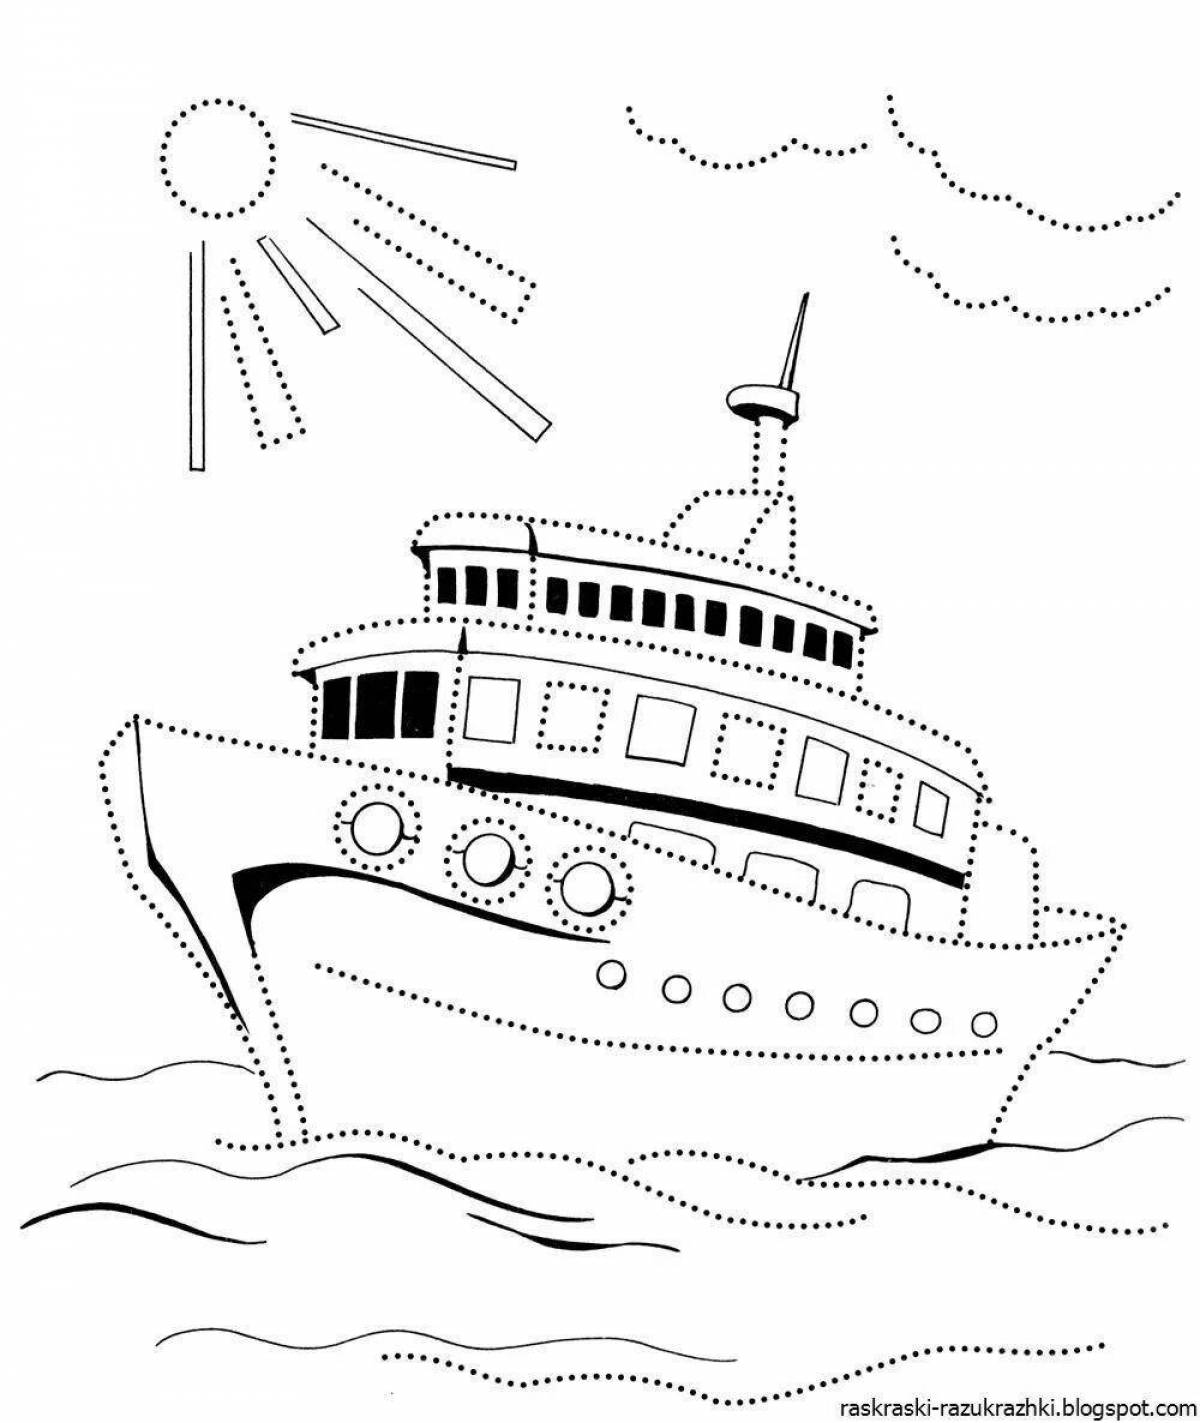 A fun water transport coloring book for 5-6 year olds